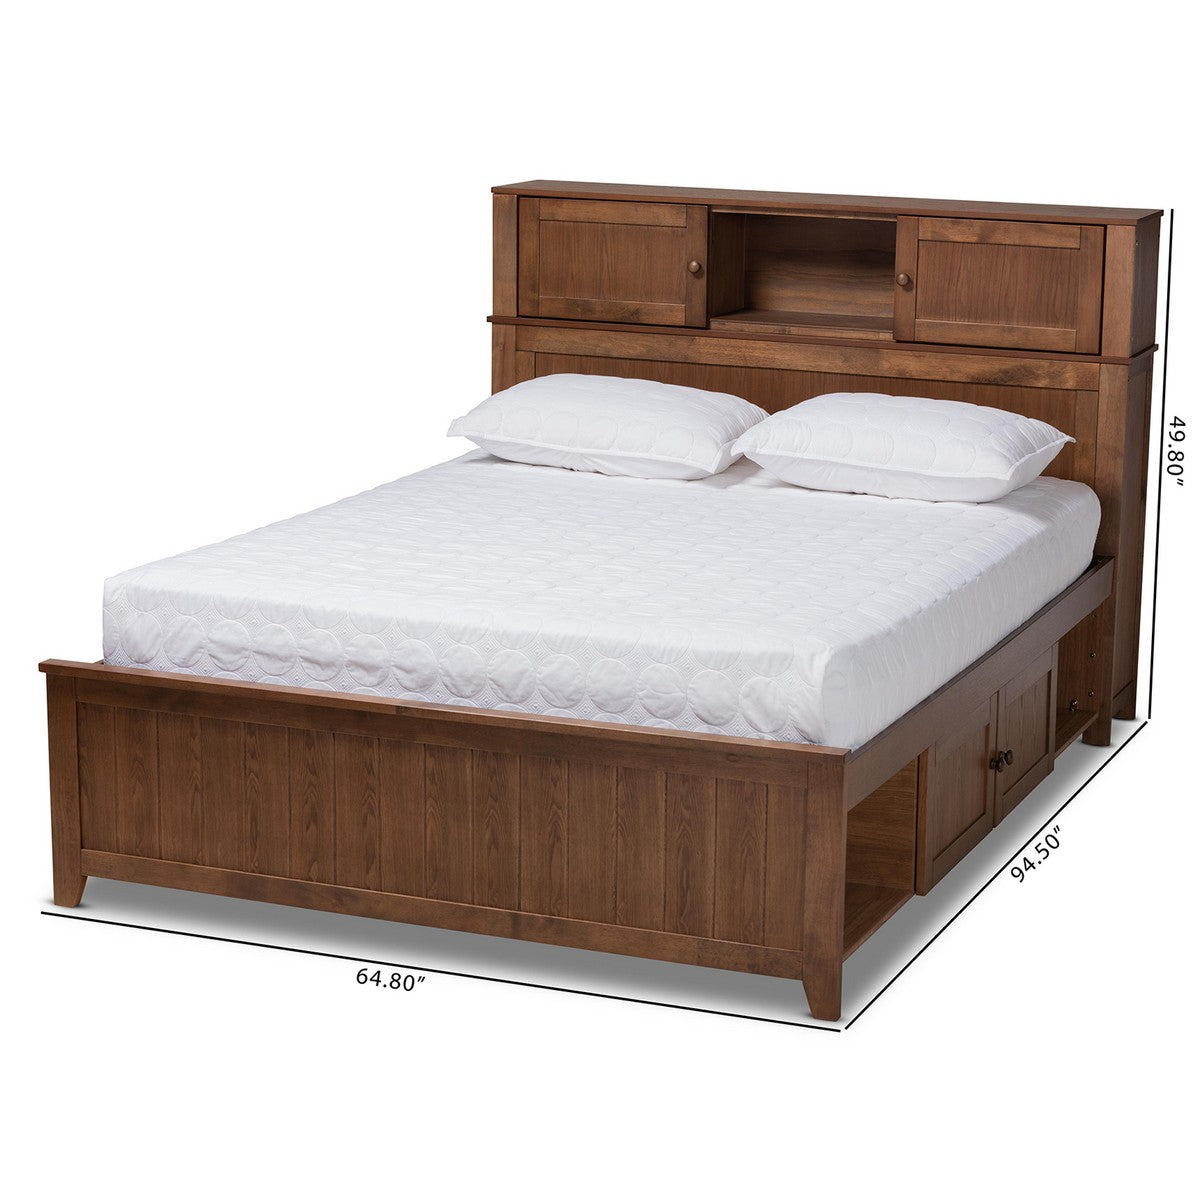 Baxton Studio Riko Modern and Contemporary Transitional Walnut Brown Finished Wood Queen Size Platform Storage Bed